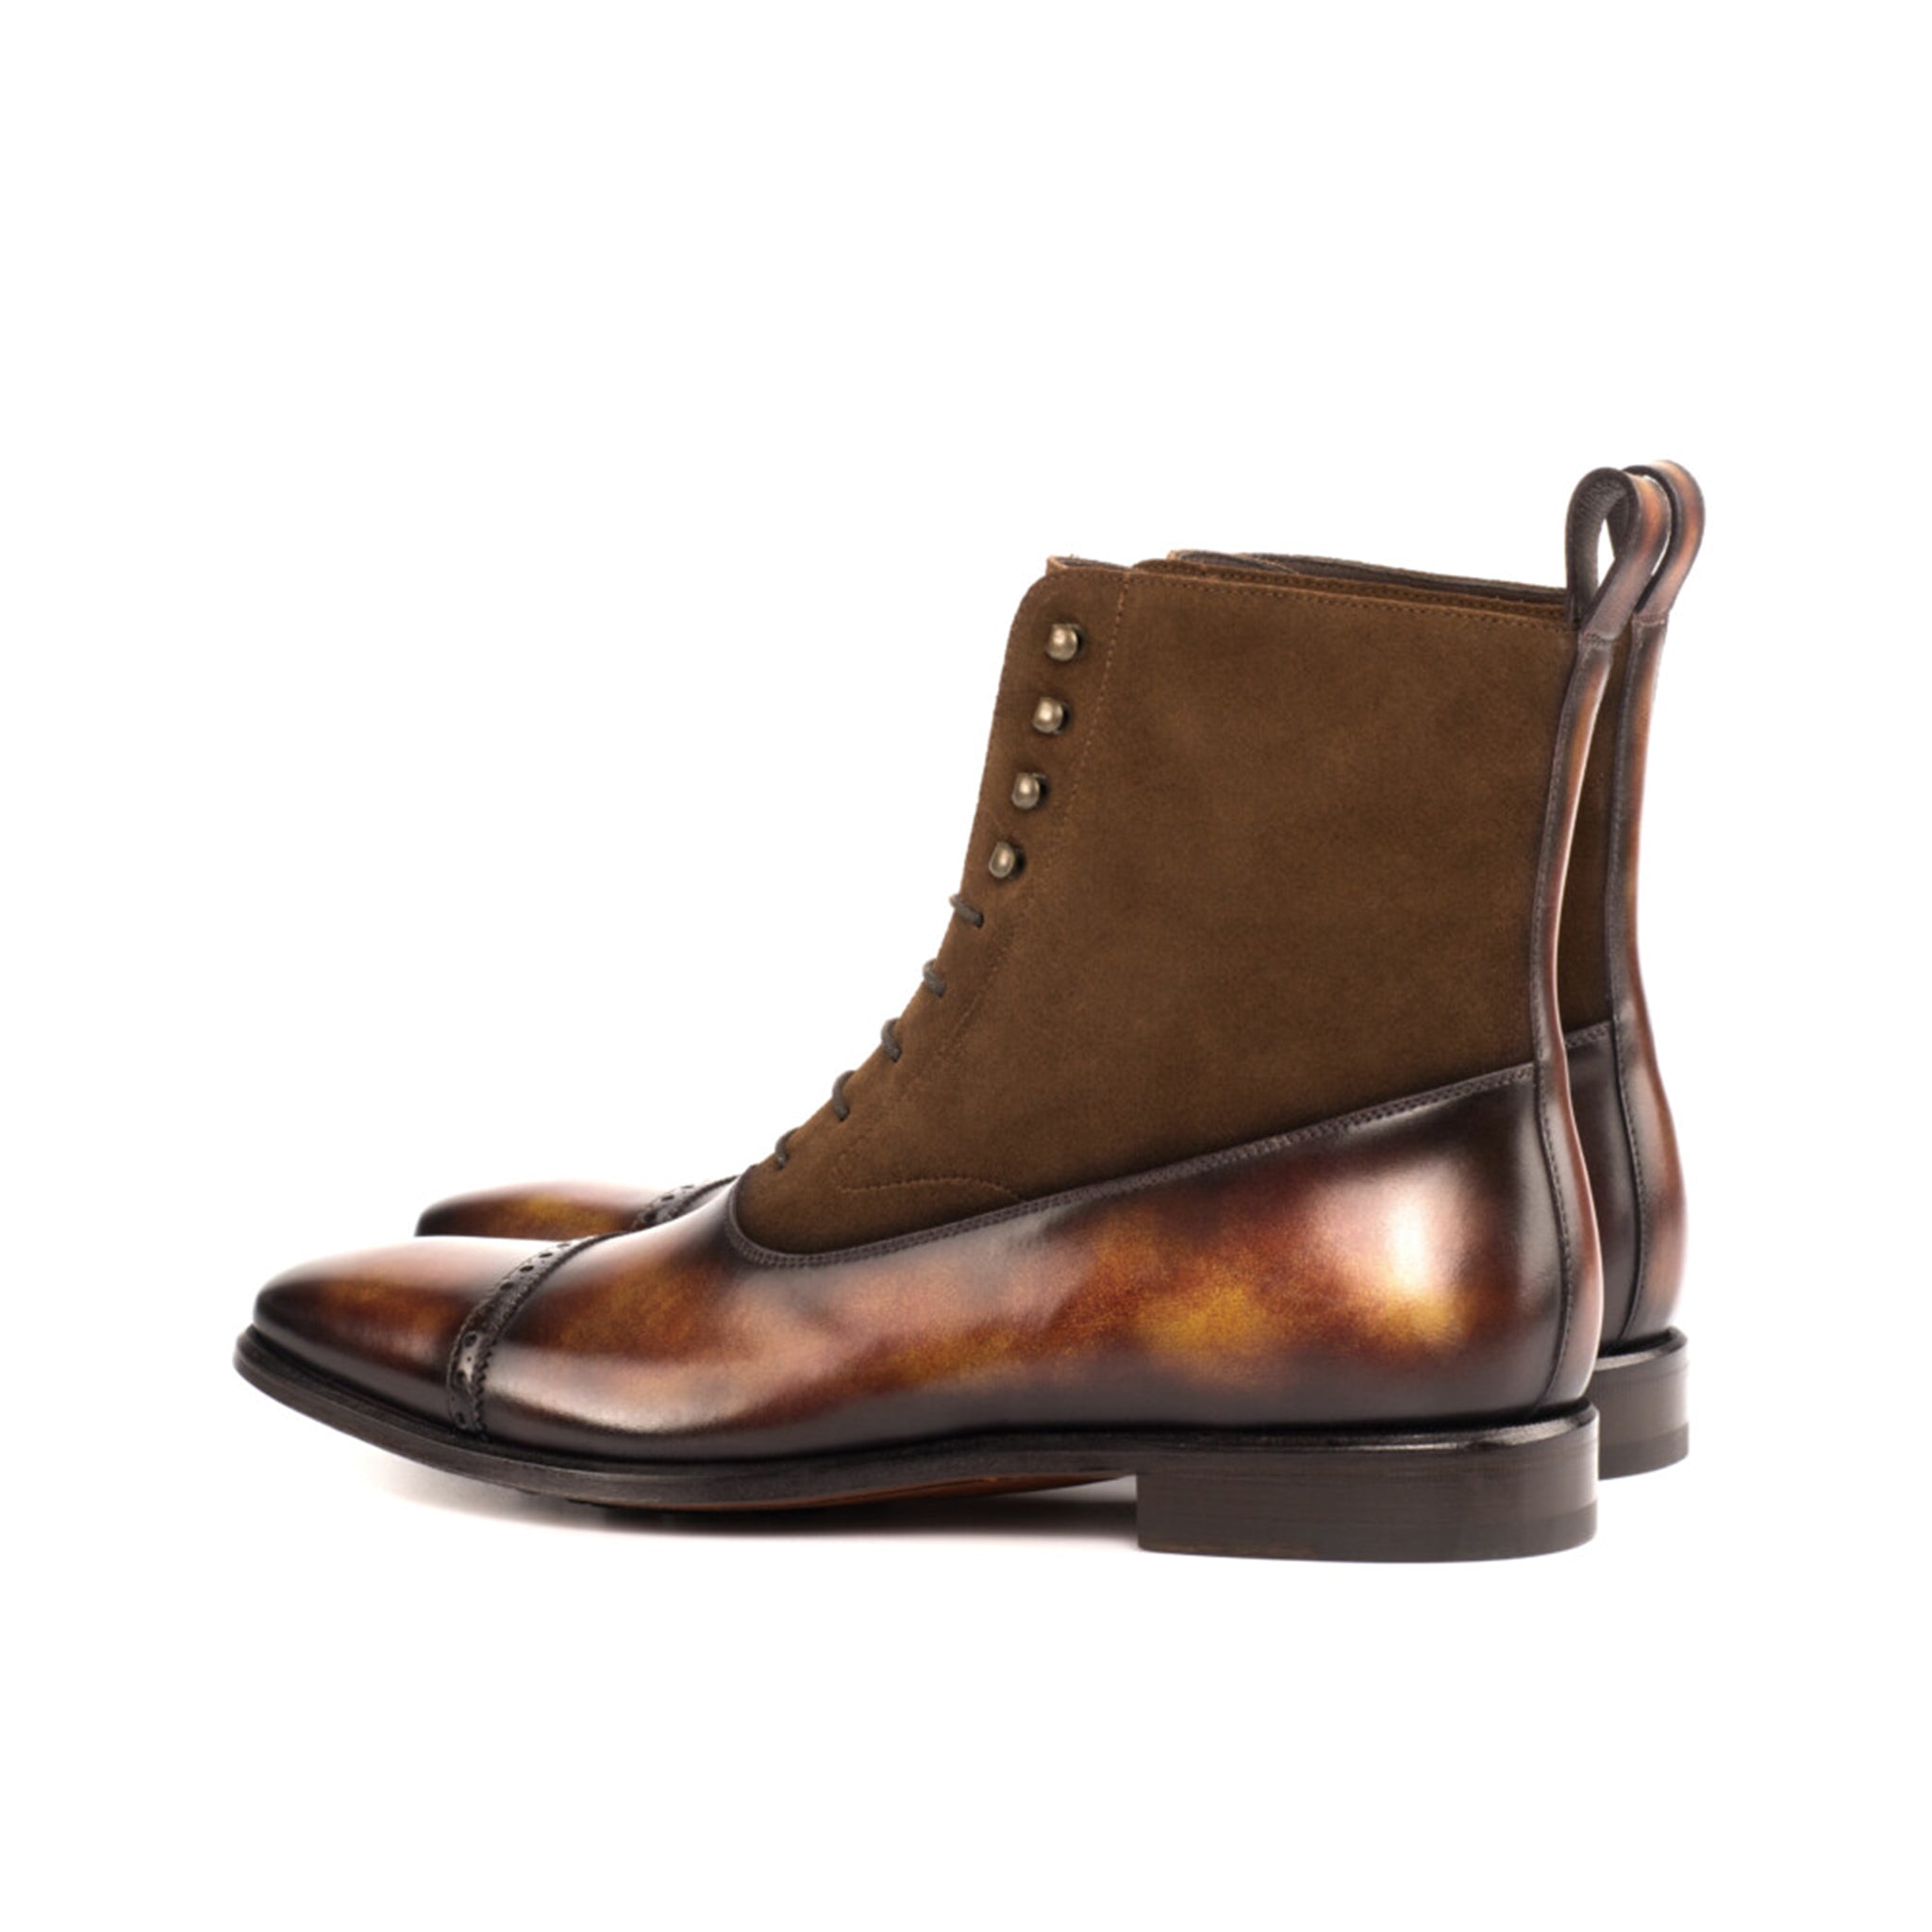 Patina Leather & Suede Balmoral Boots